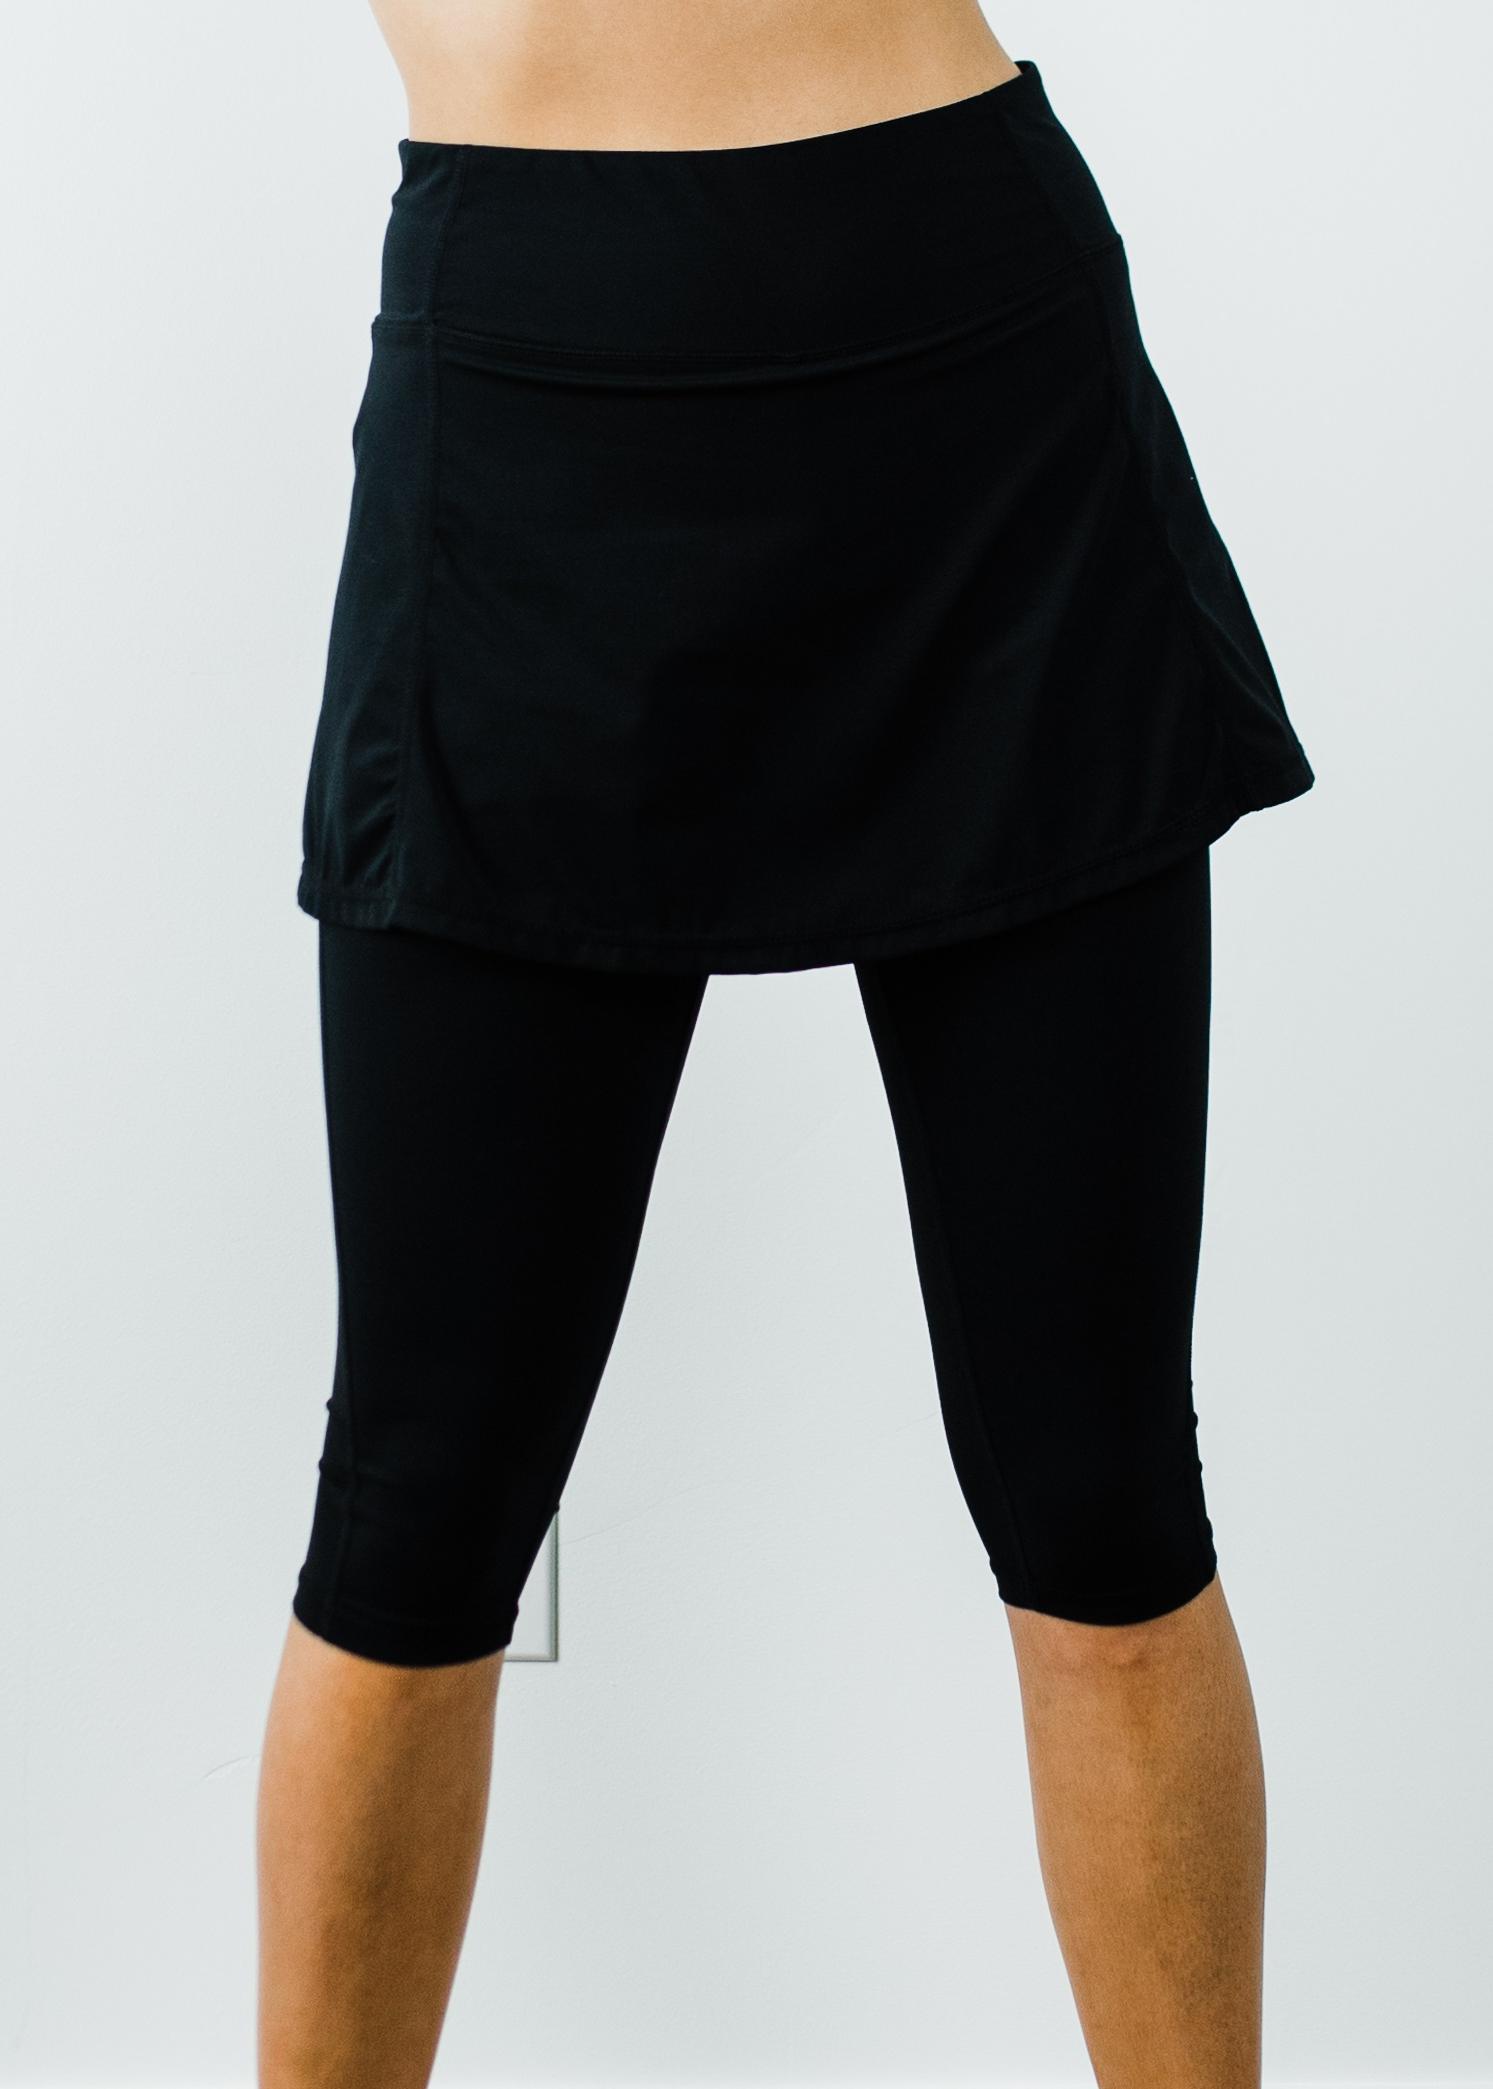 Short Sport Skirt With Attached 17 Leggings. Calypsa by ModLi